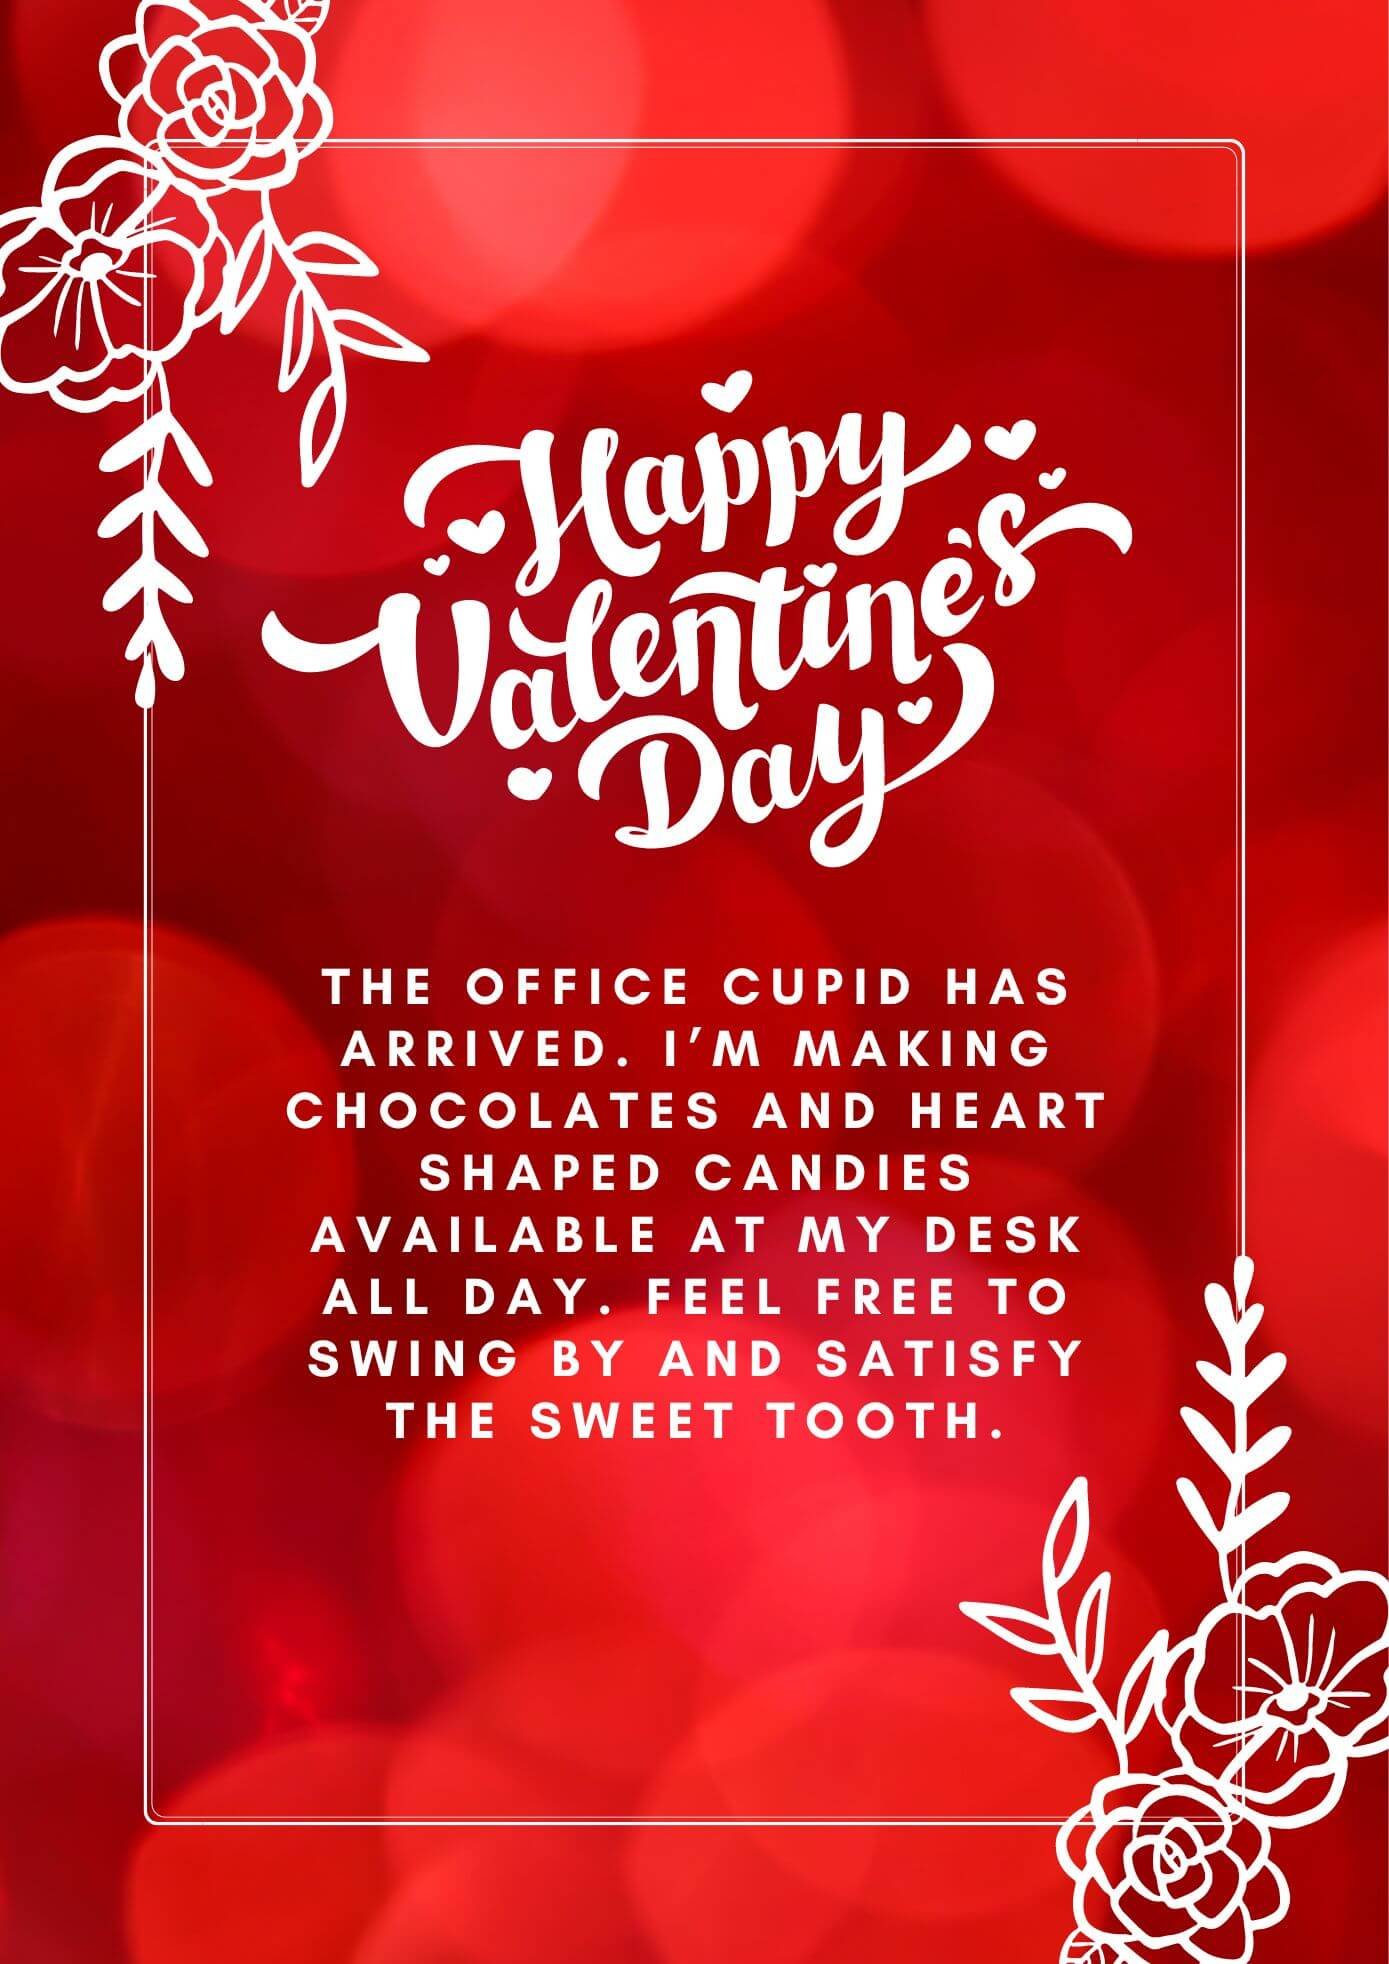 Valentines Day Wishes For Coworkers And Employees